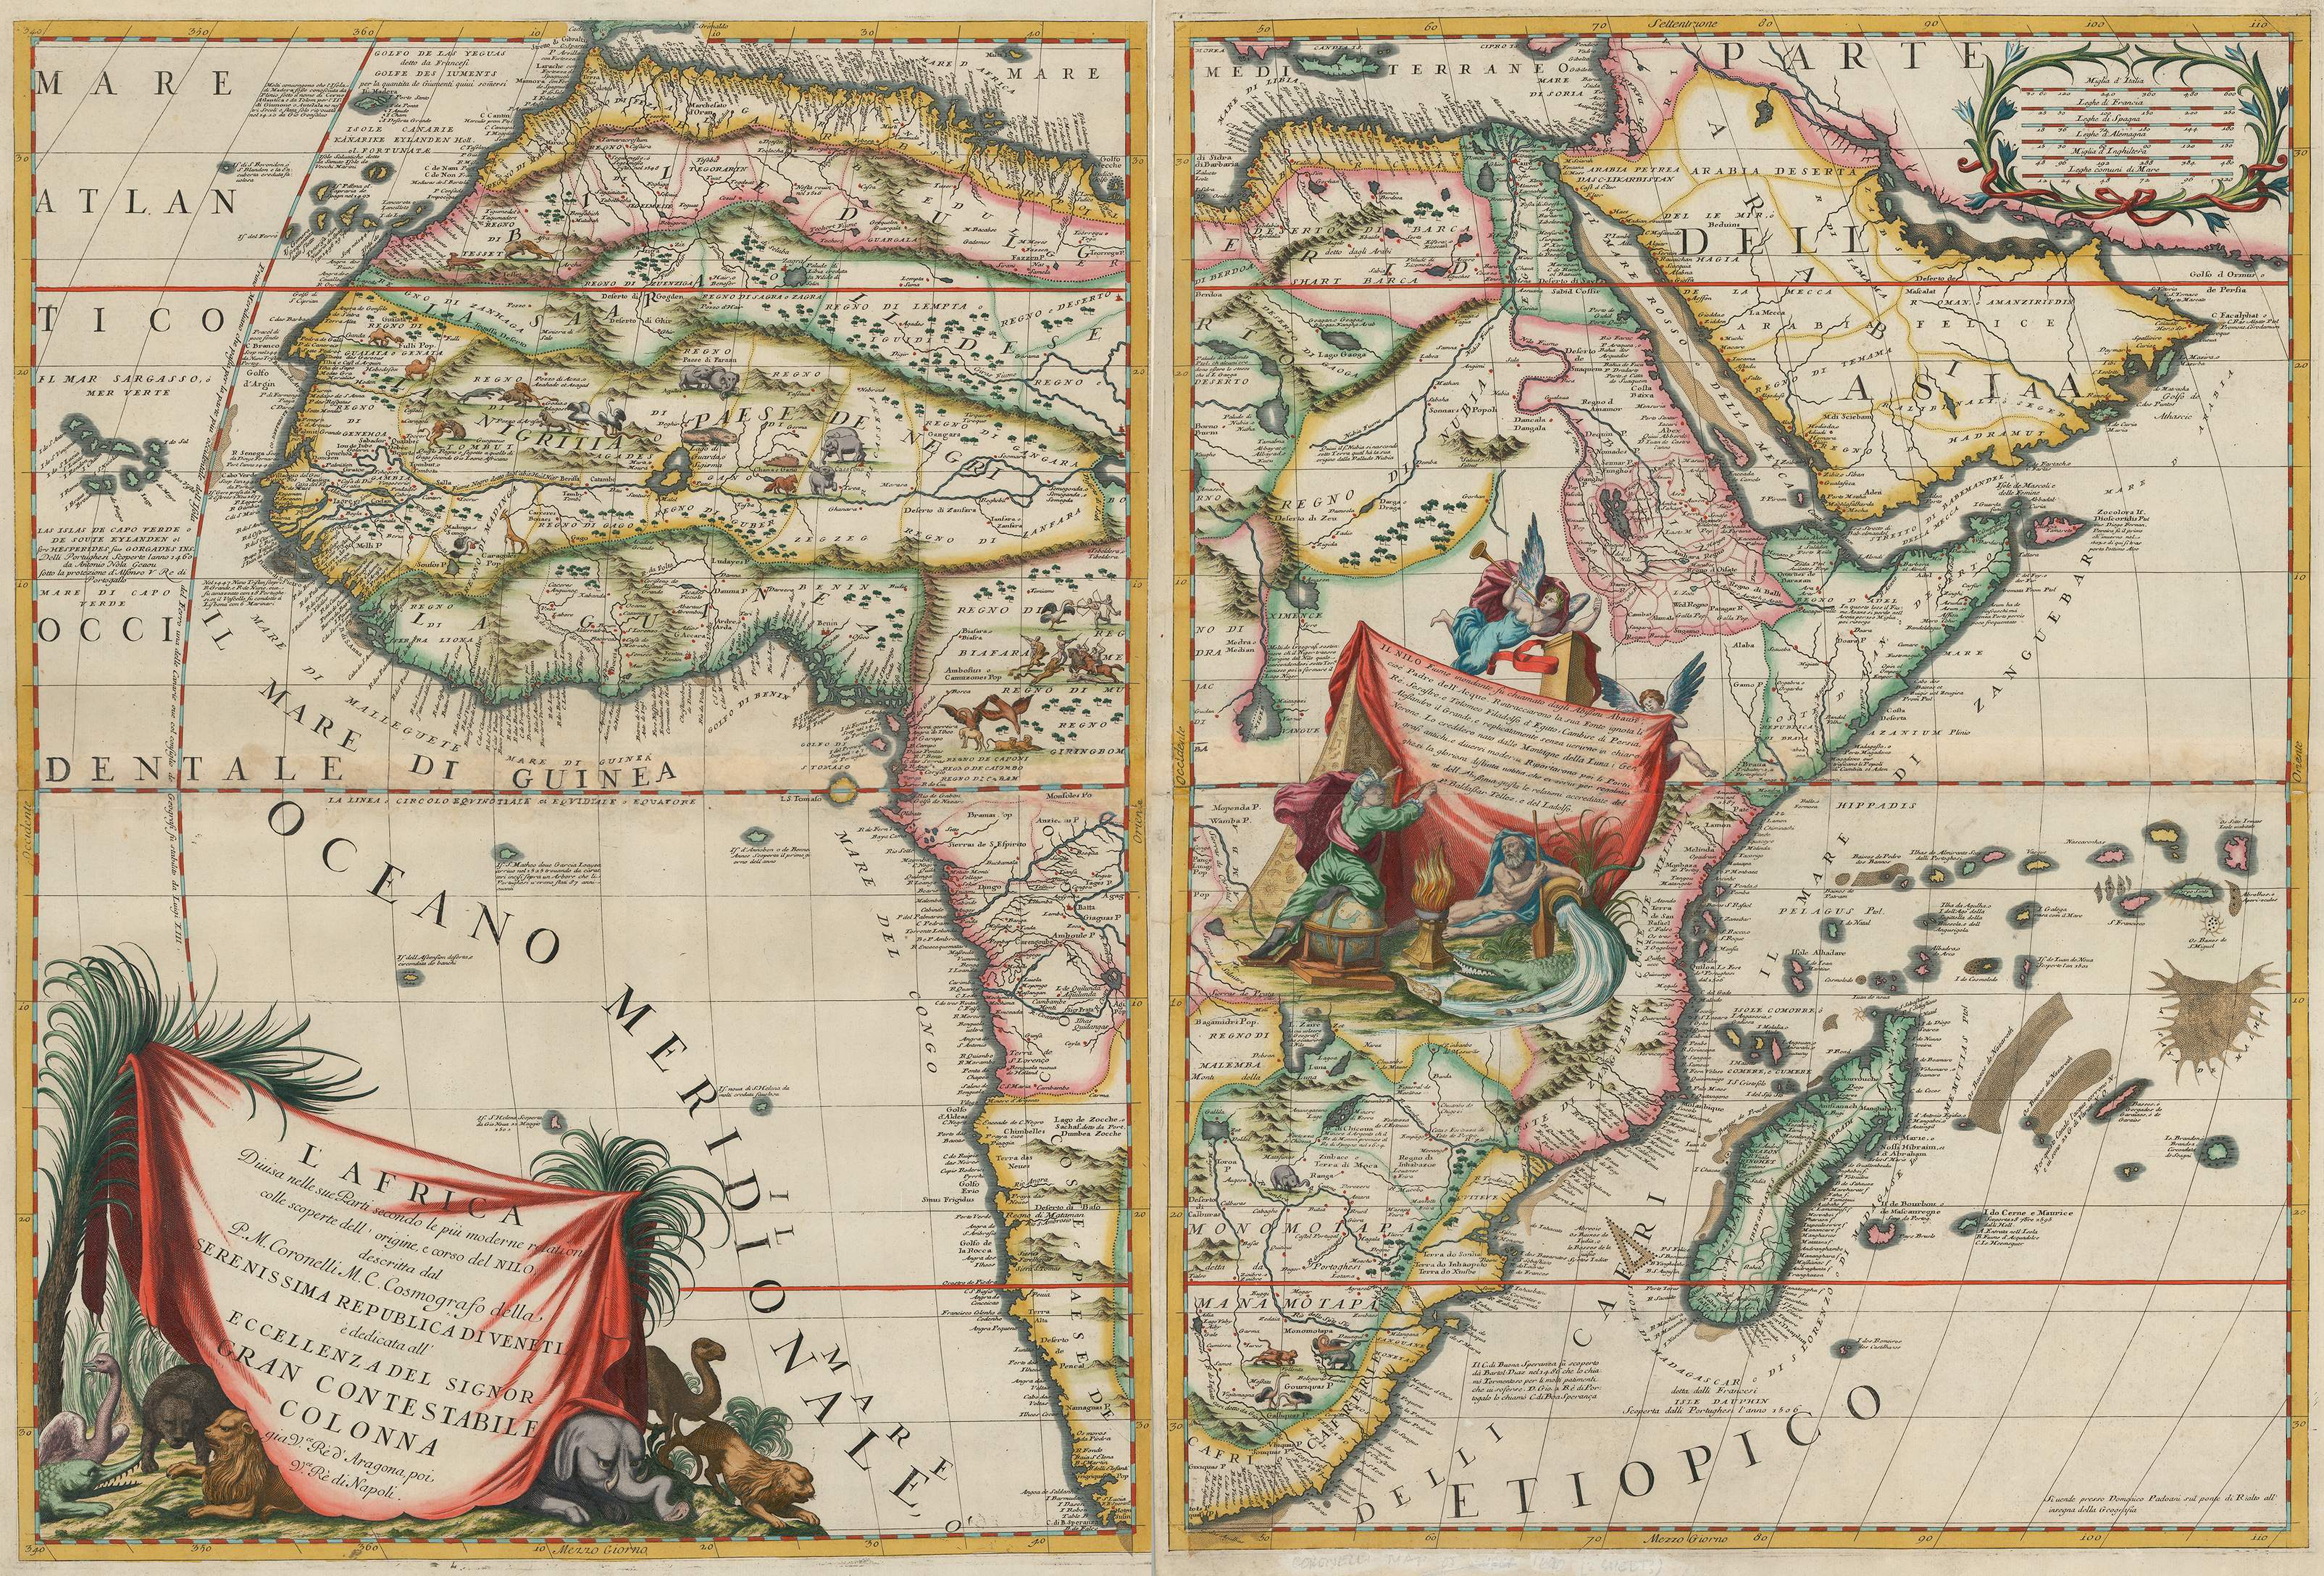 Coronelli, L'Africa, 1692 UTA Libraries Special Collections